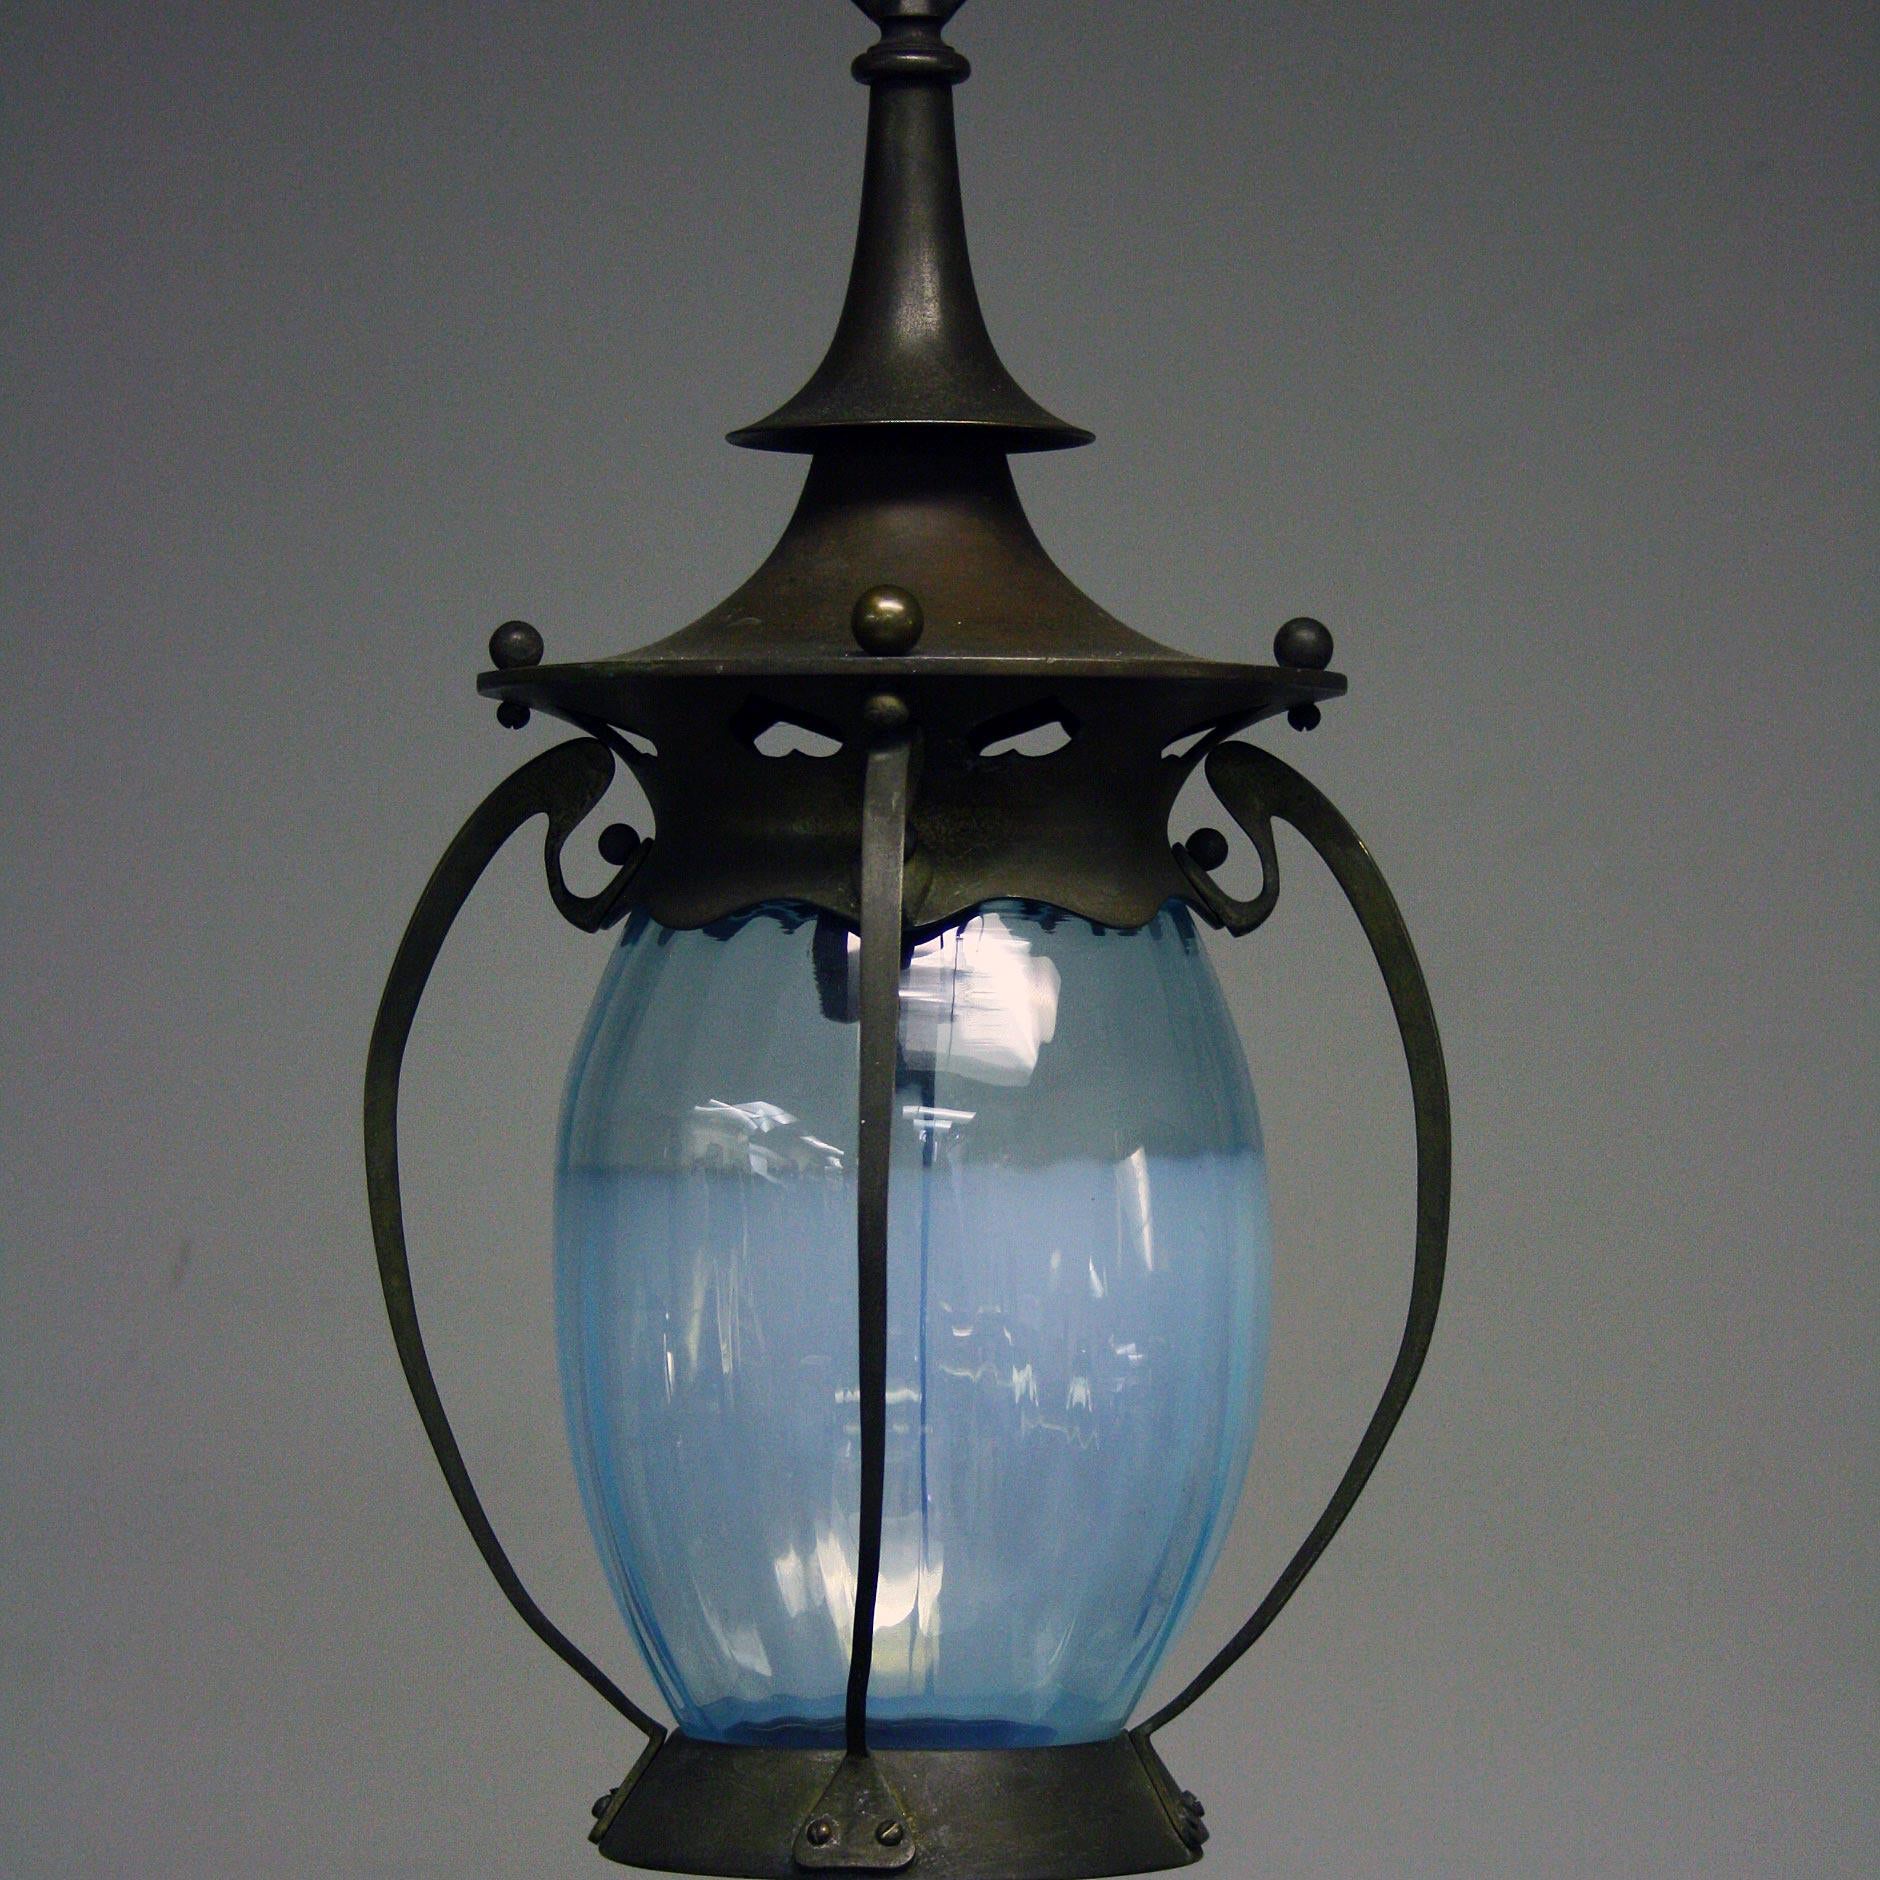 A stunning Art Nouveau lantern with bronzed brass frame work and with original blue glass, in excellent condition and has been rewired and PAC tested.